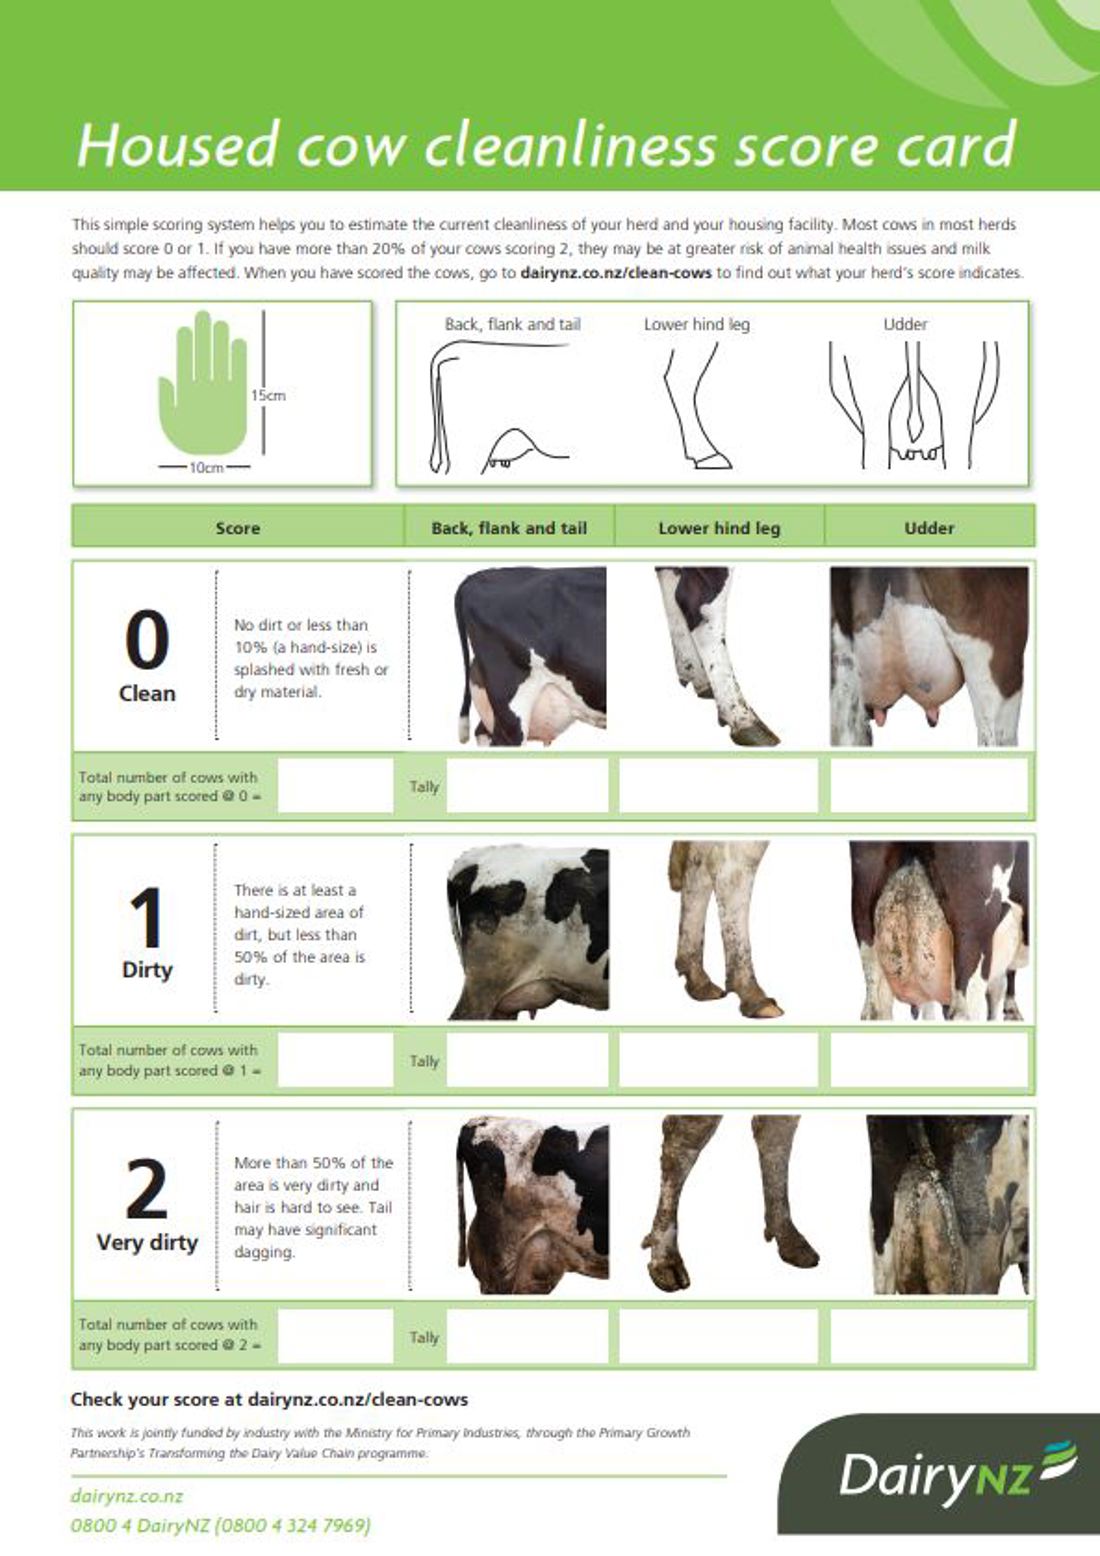 Housed Cow Cleanliness Score Card Image